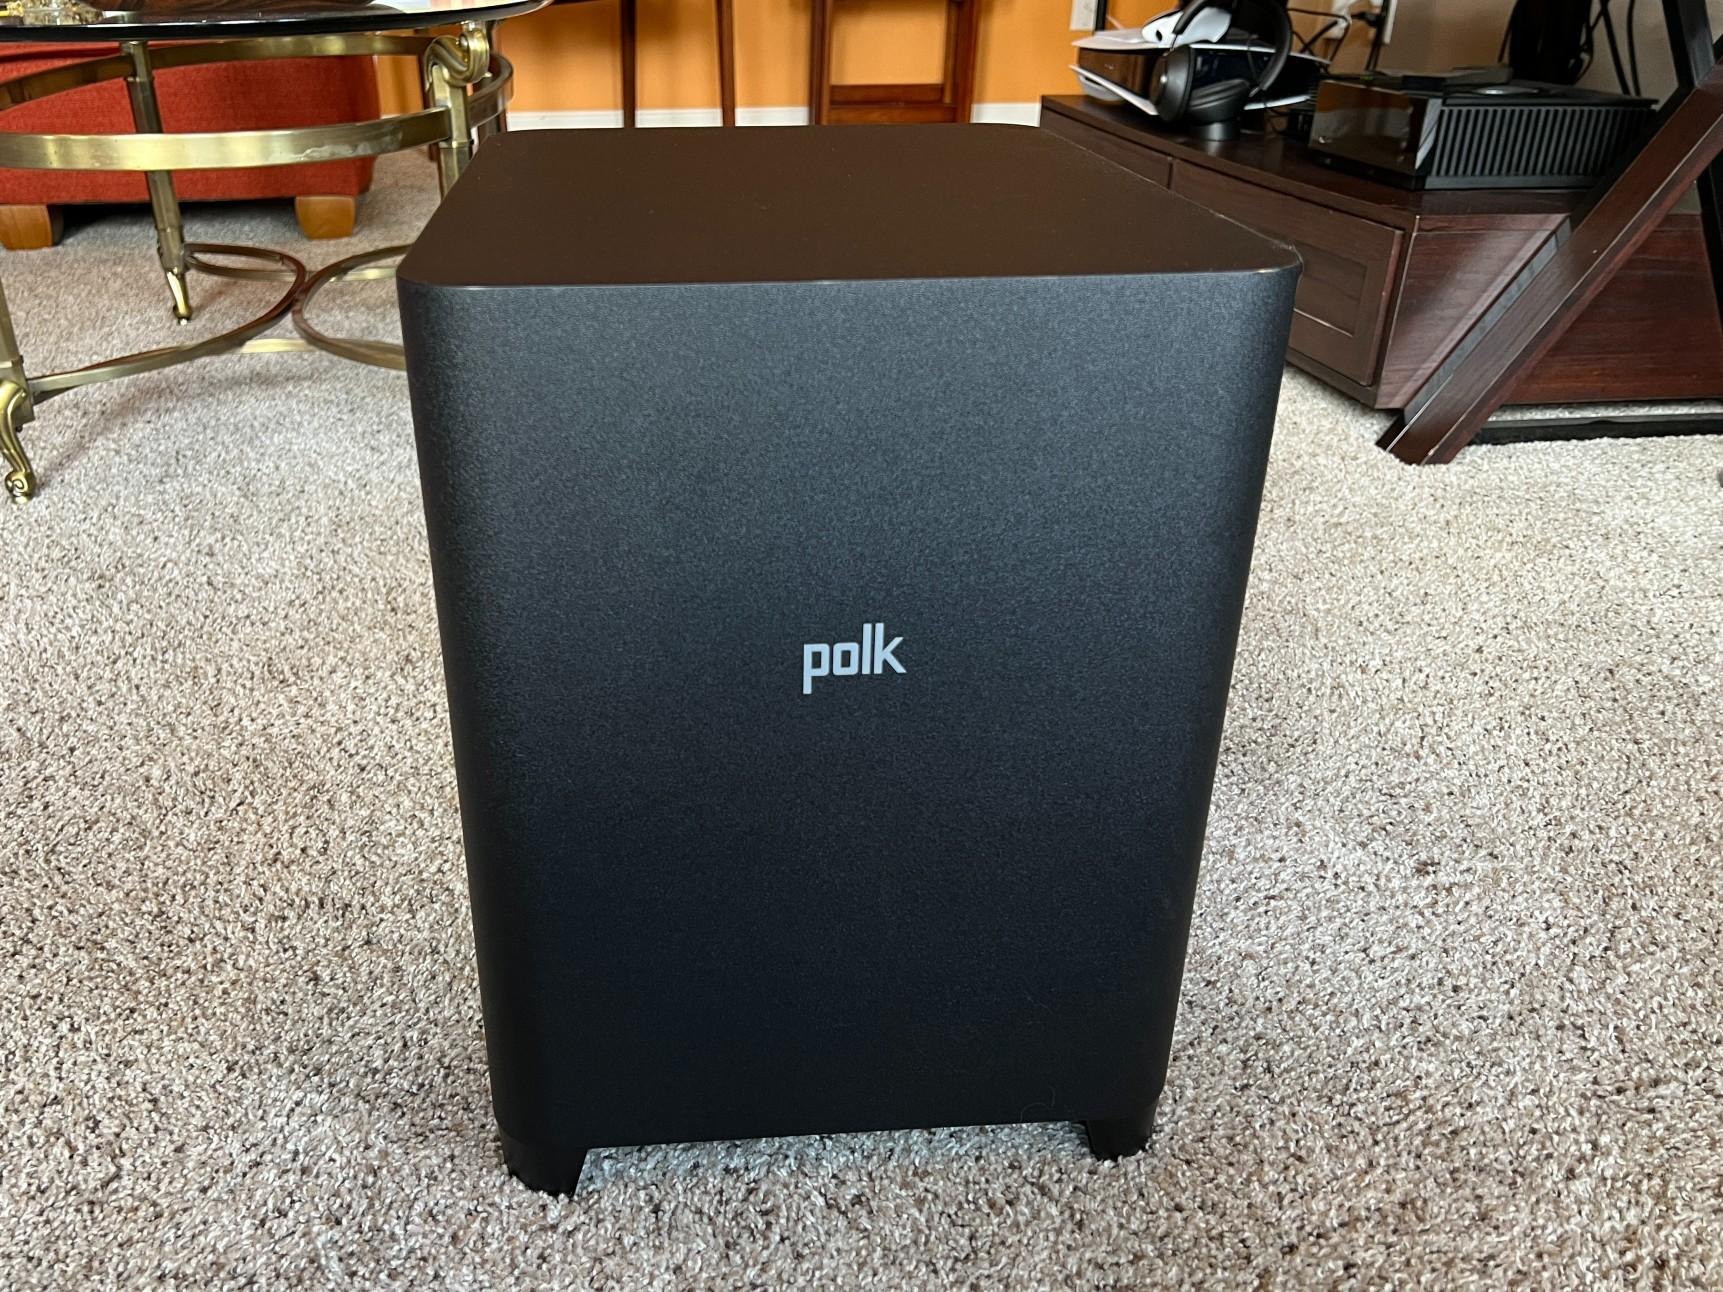 The Polk Magnifi Max AX soundbar's subwoofer is shown from the front side.